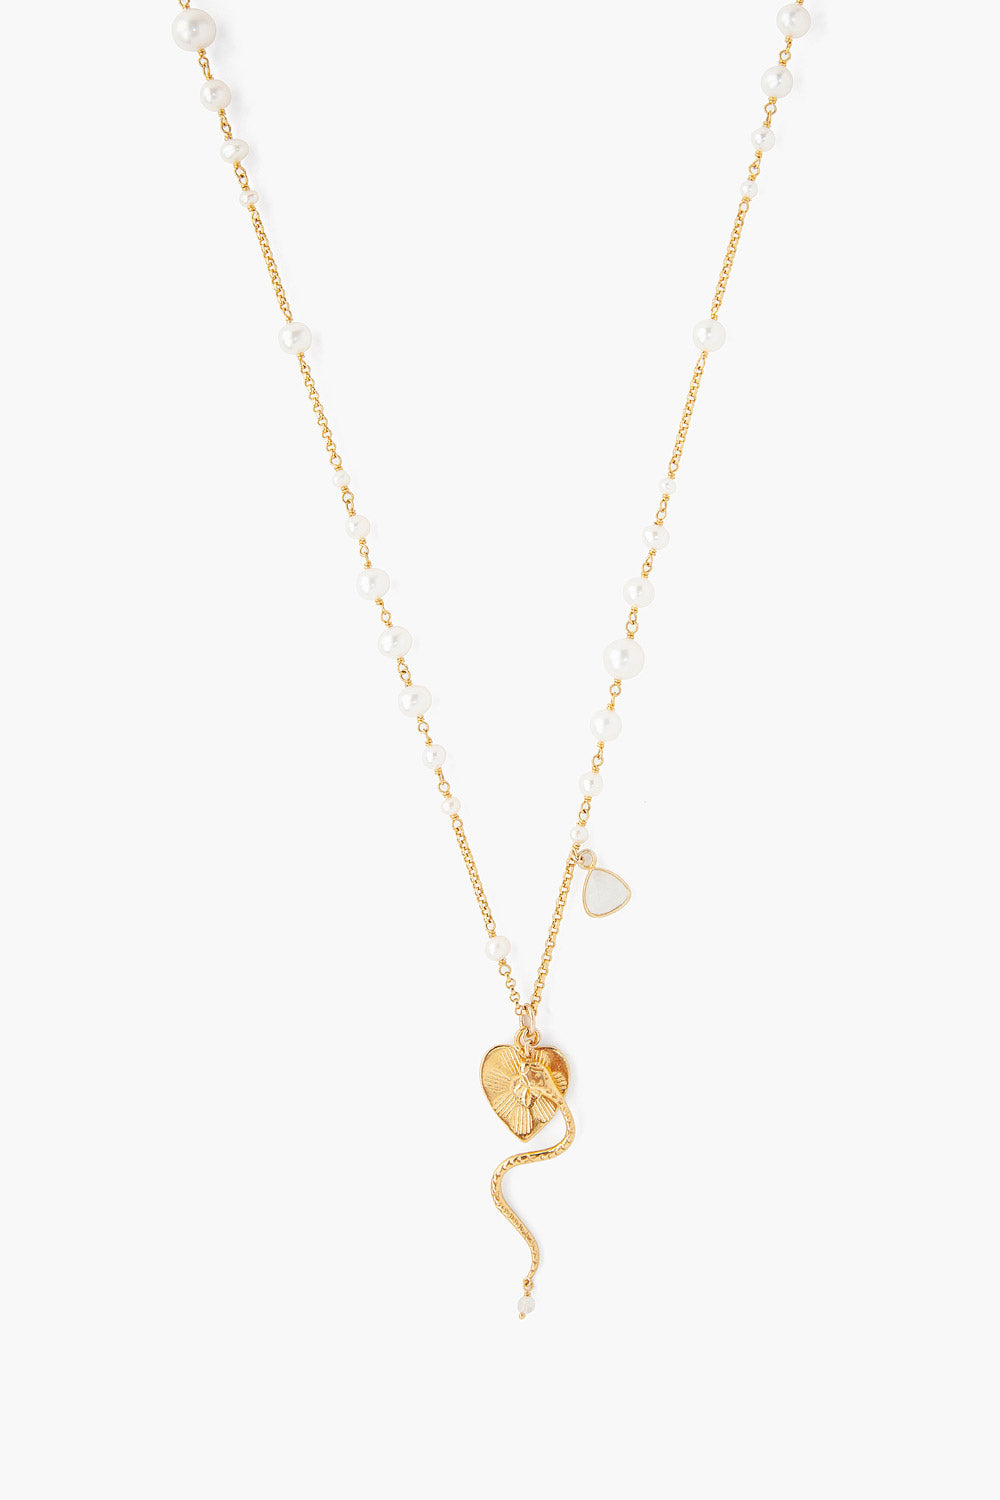 WHITE PEARL HEART PENDANT NECKLACE